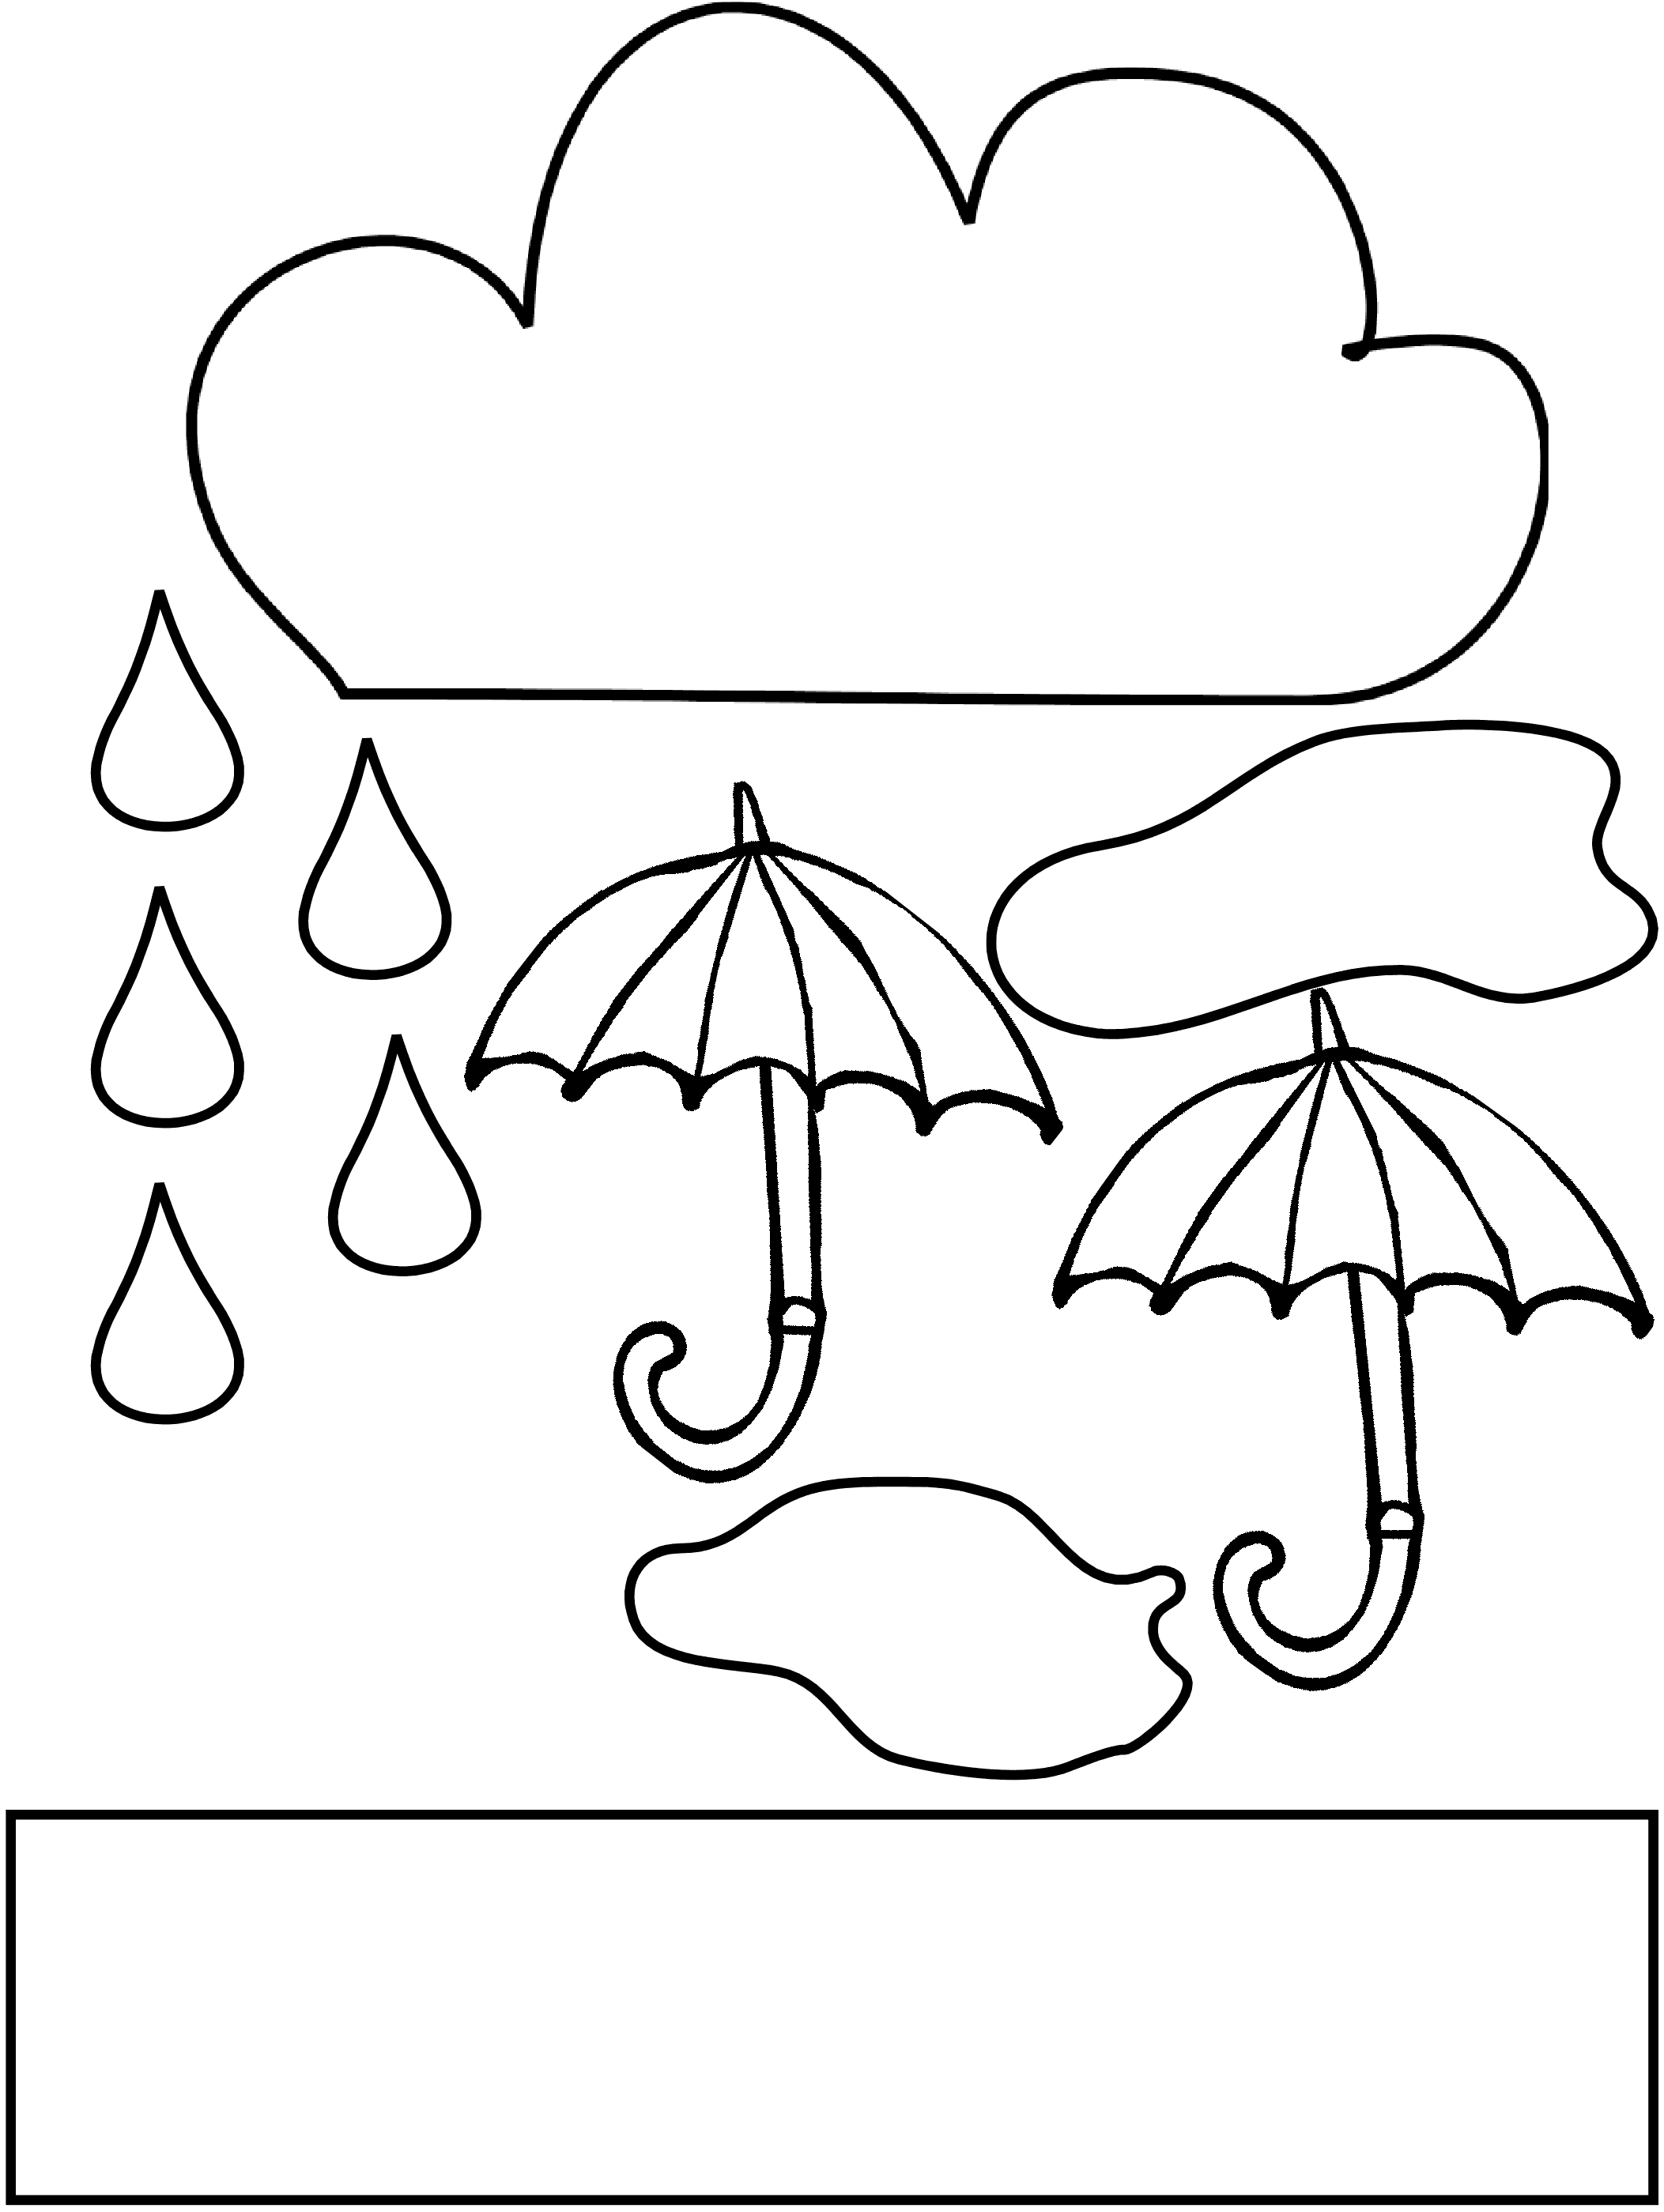 Raindrop Coloring Pages Coloring Page Printable Raindrops Coloring Home